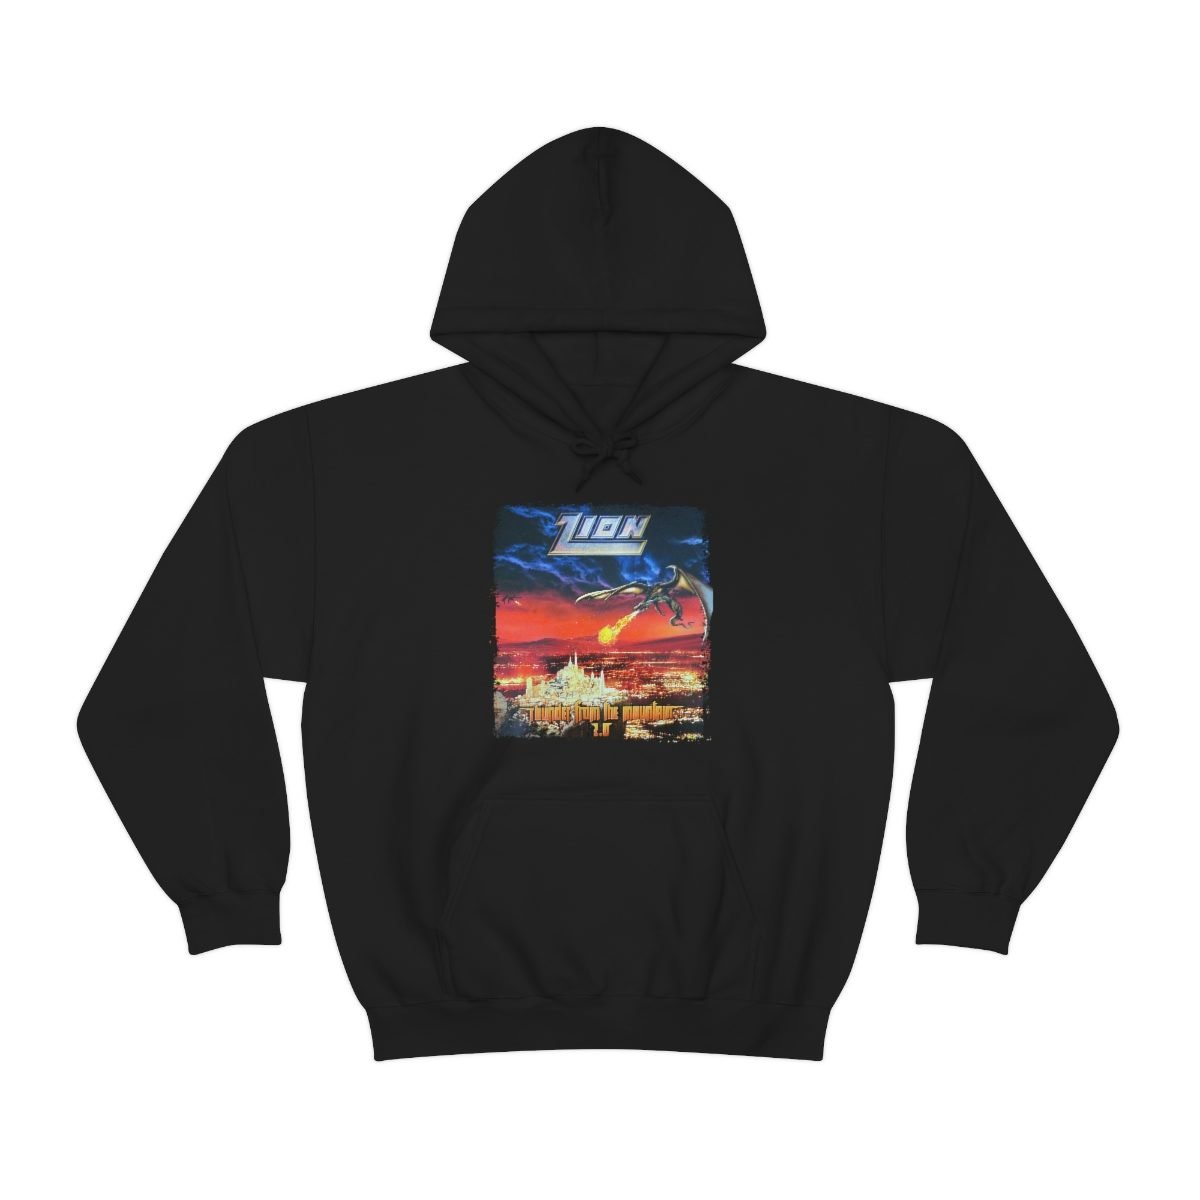 Zion – Thunder From The Mountain 2.0 Pullover Hooded Sweatshirt